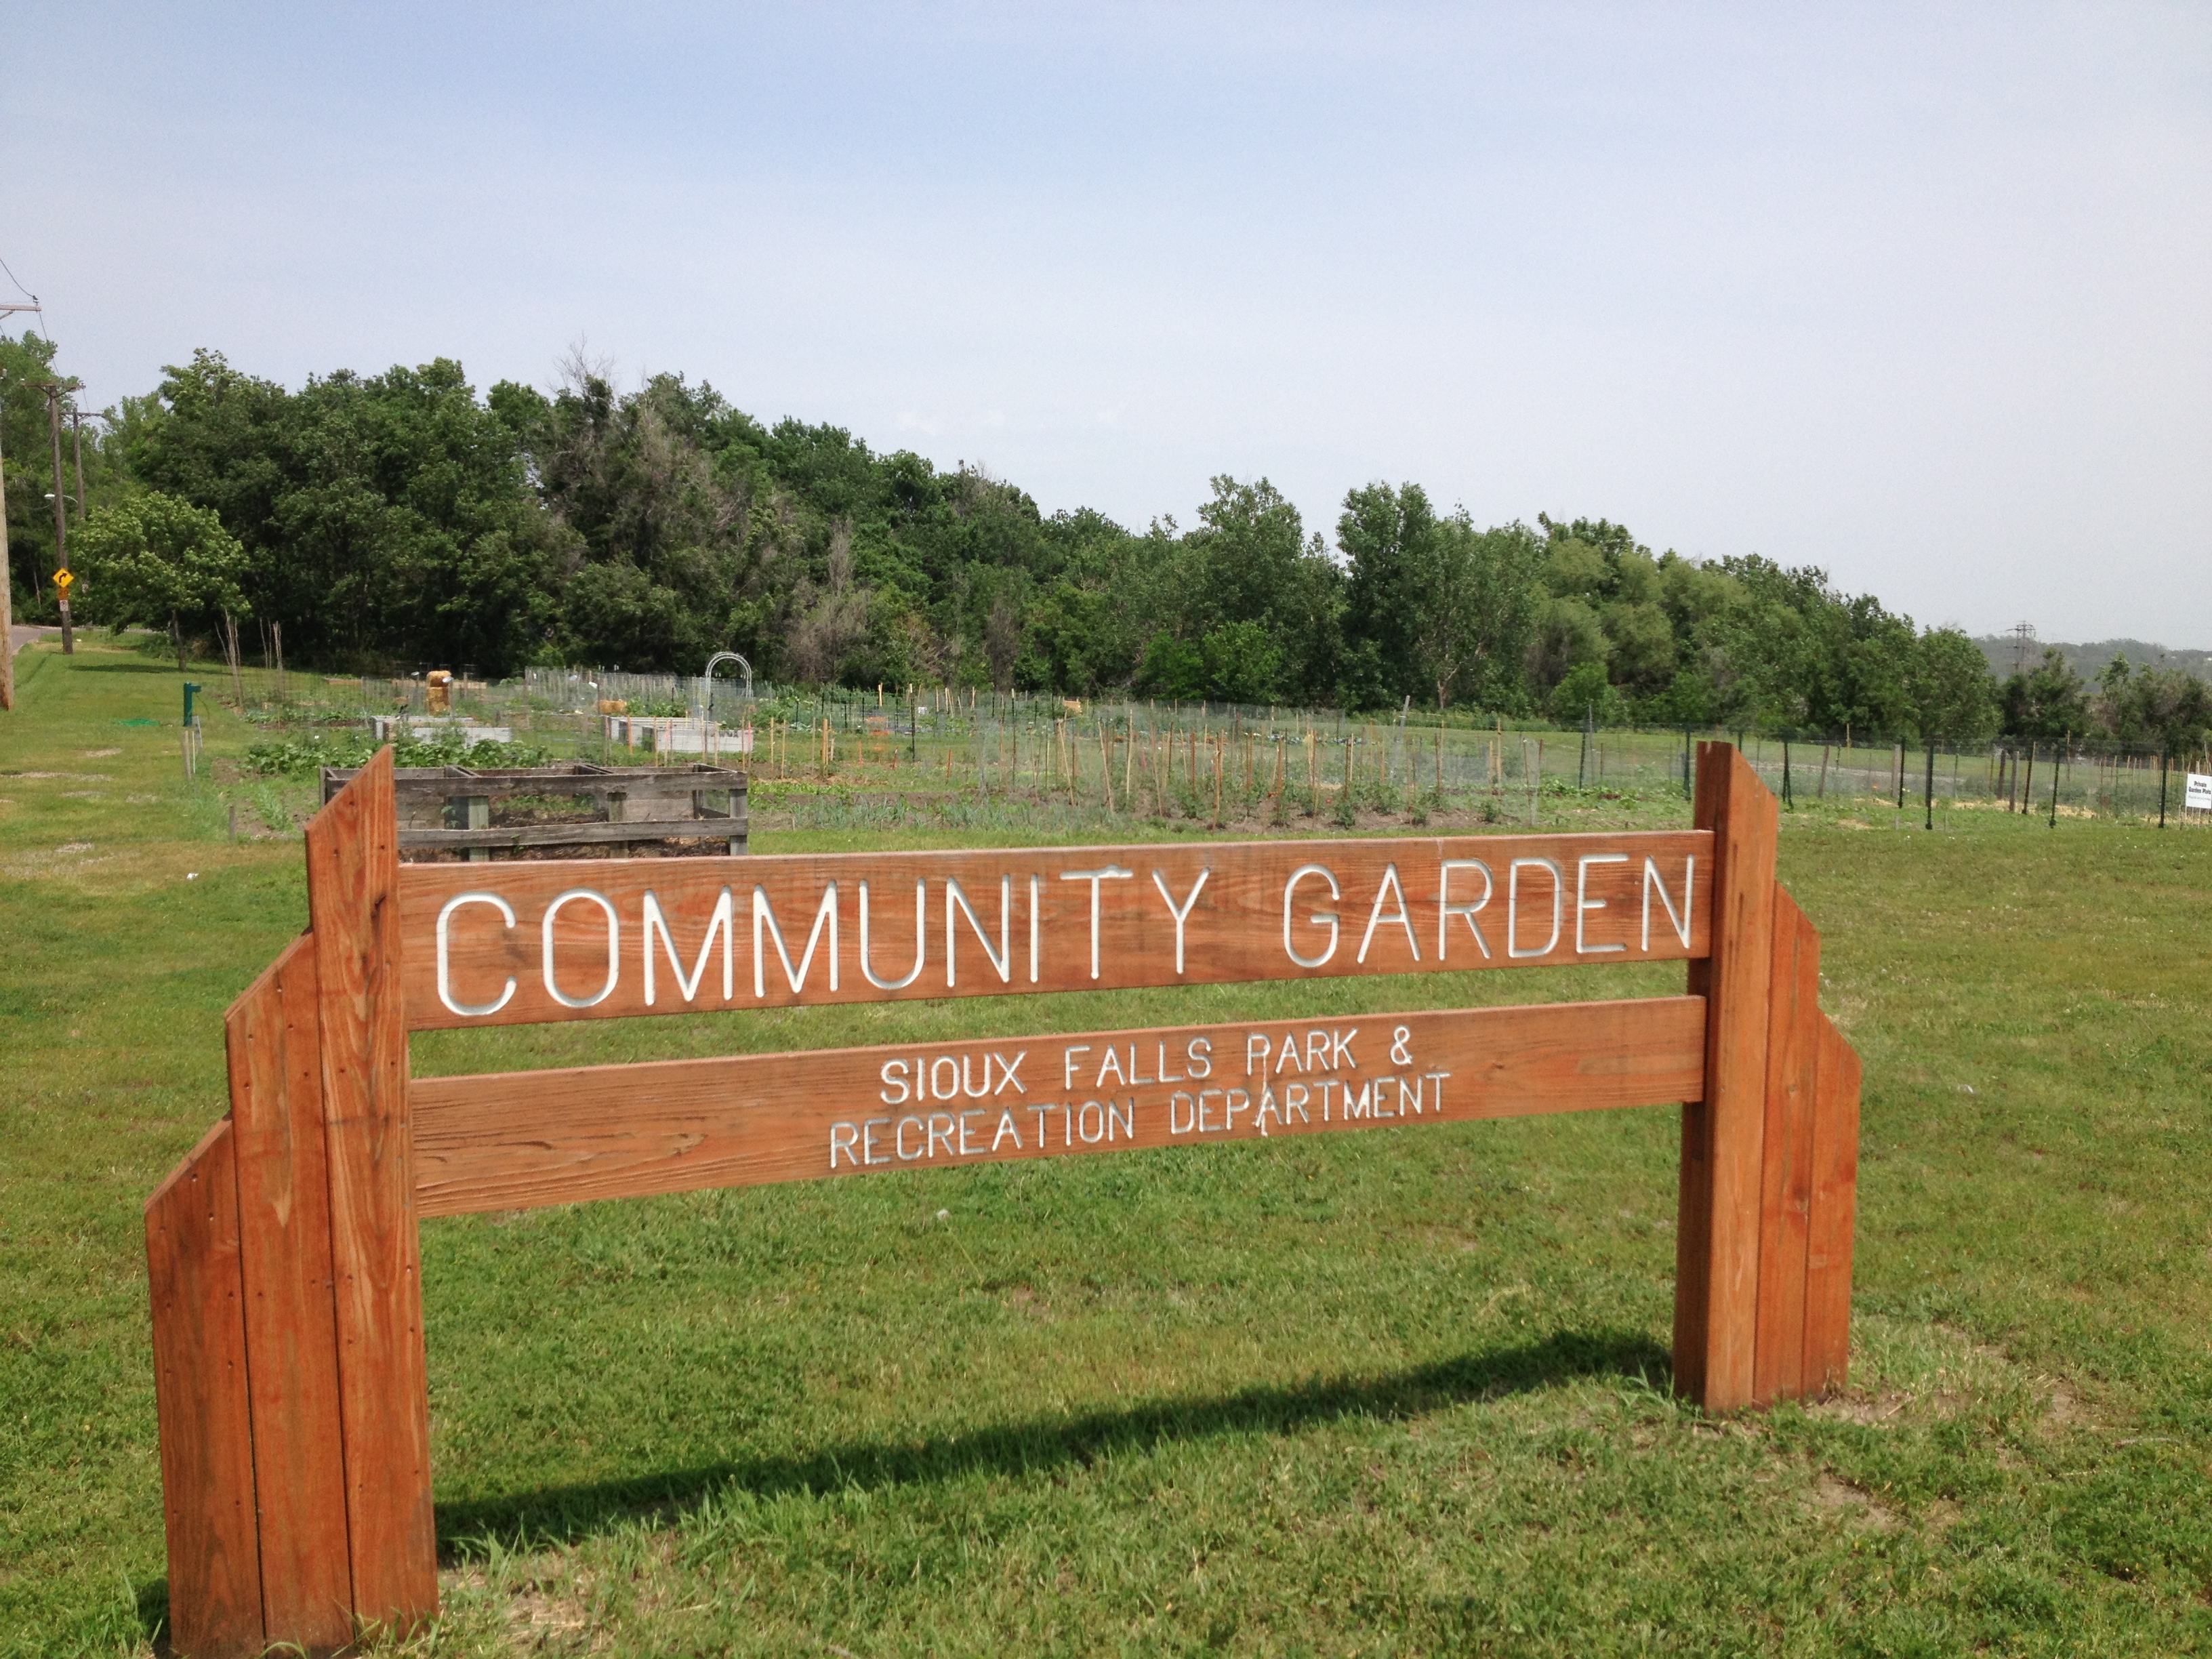 a wooden sign for a community garden